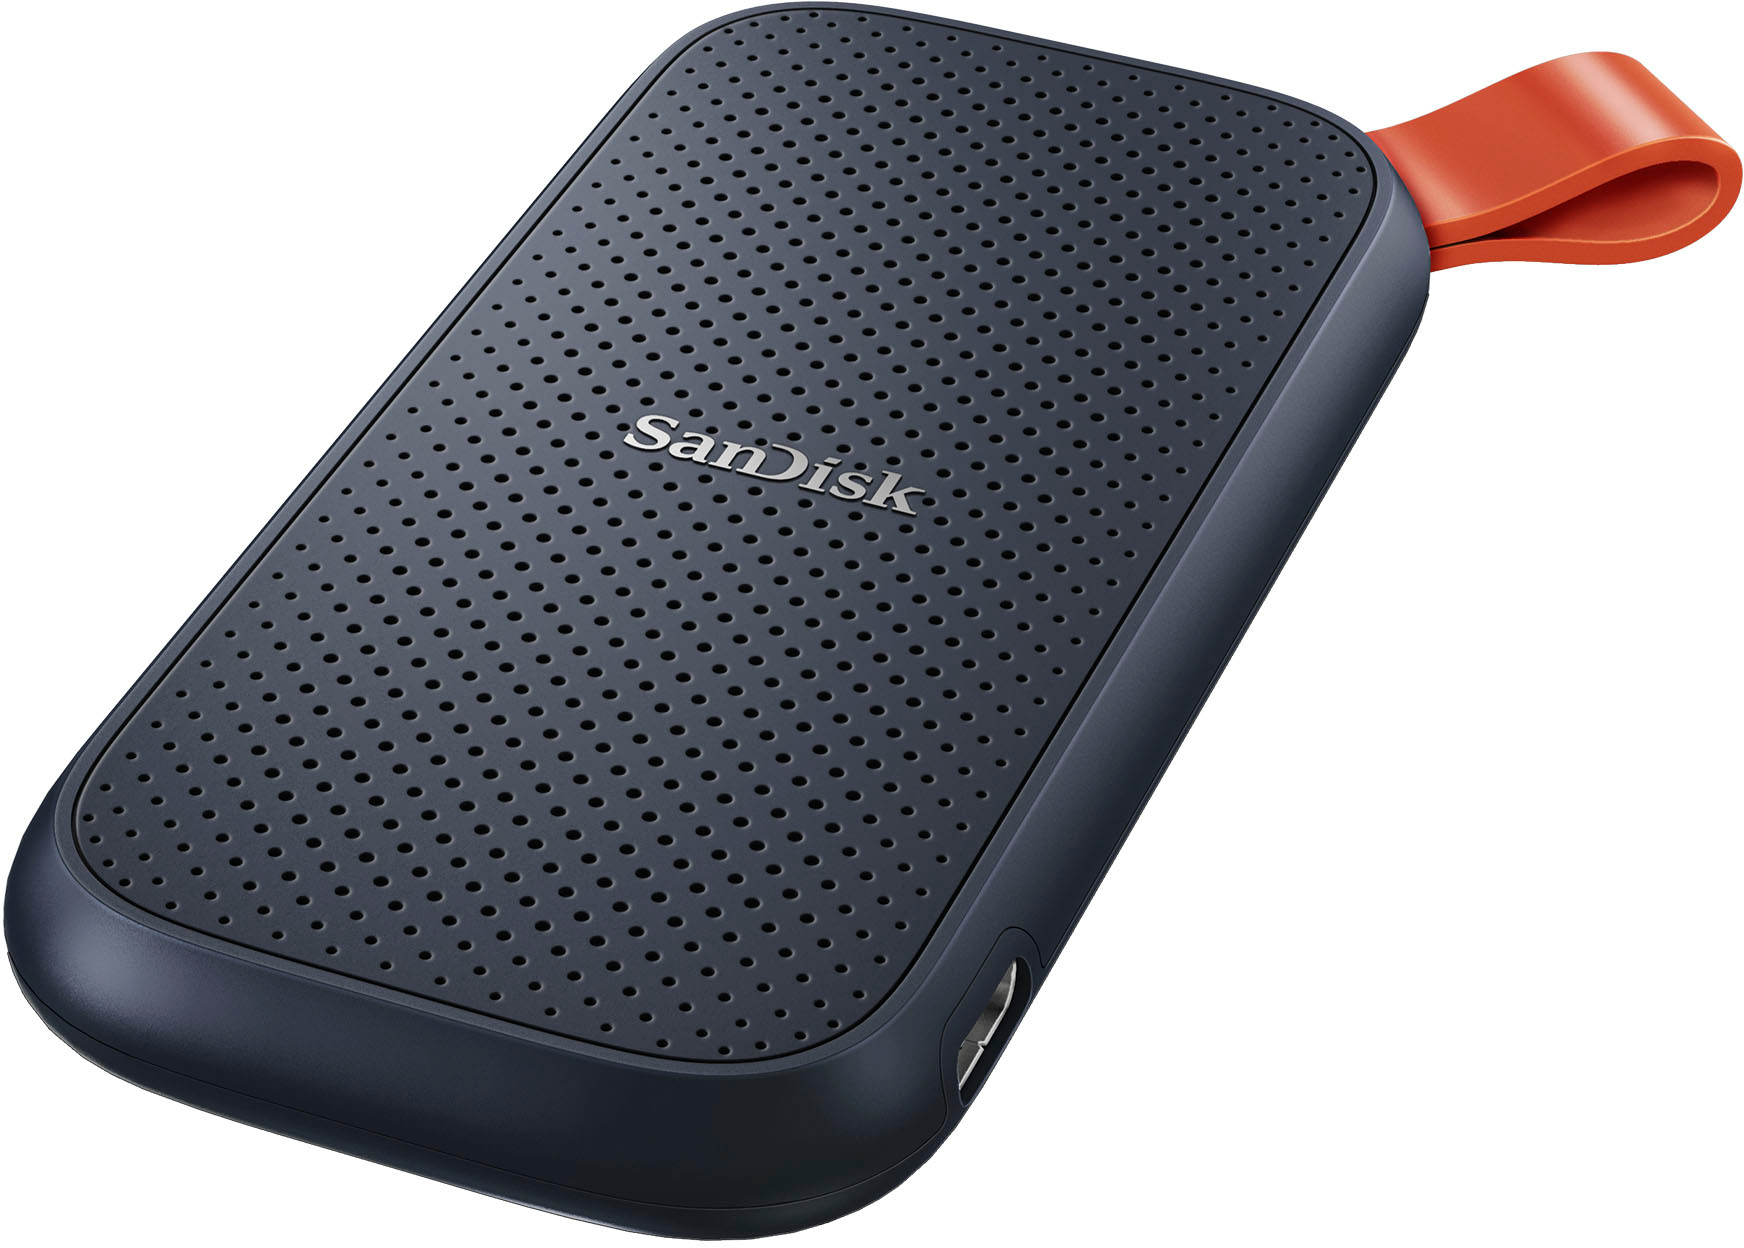 SANDISK DISQUE SSD EXTREME PORTABLE V2 2TB